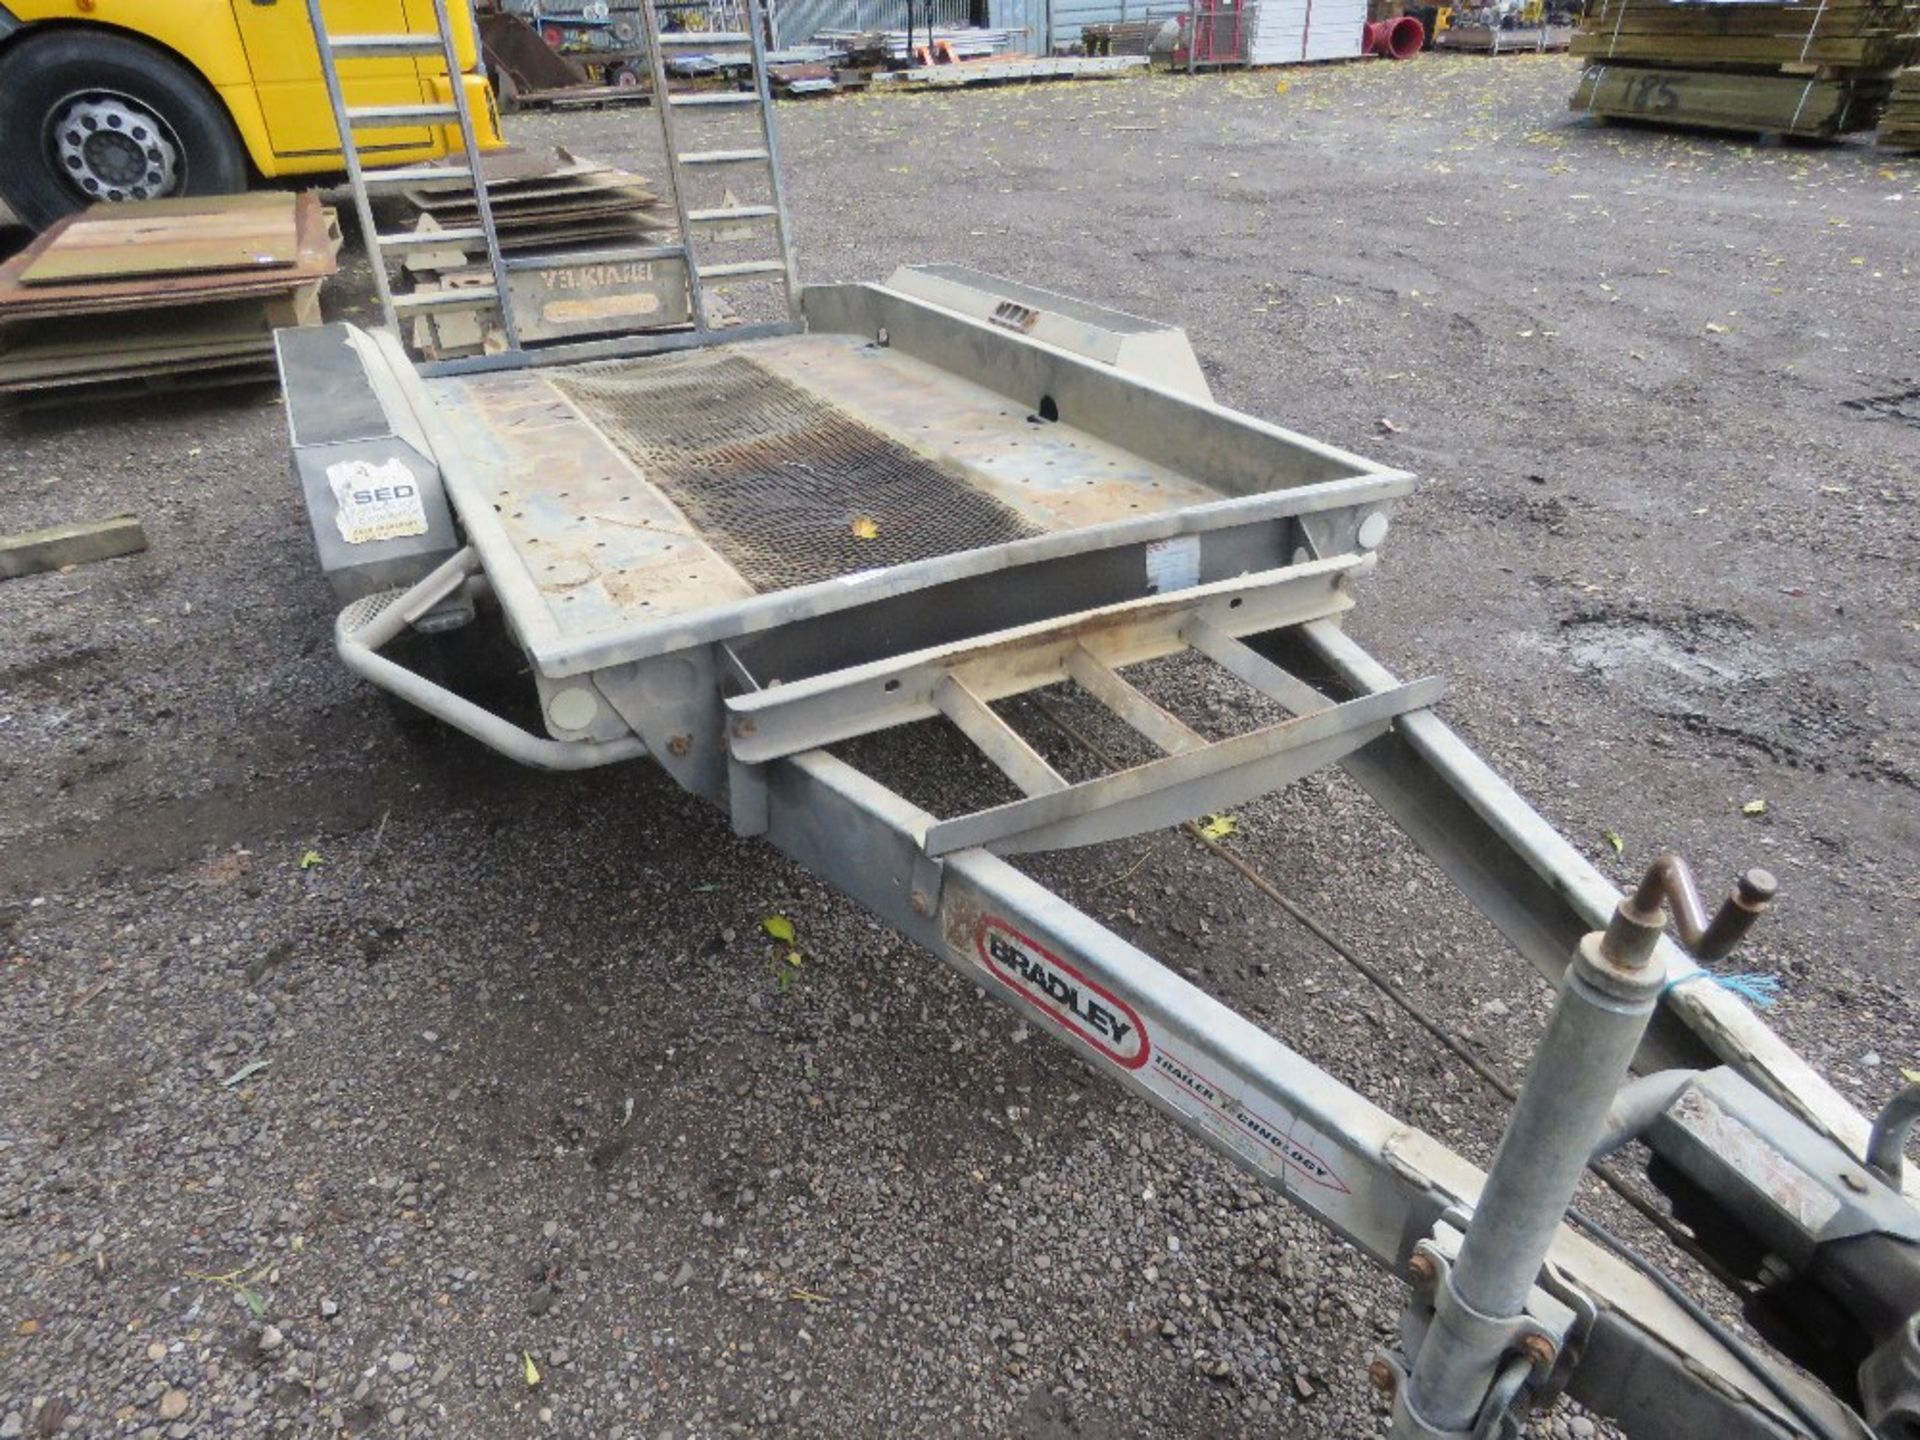 BRADLEY S2600PT TWIN AXLED MINI DIGGER PLANT TRAILER, YEAR 2008, PIVOT AXLE. 8FT X 4FT BED APPROX. - Image 2 of 8